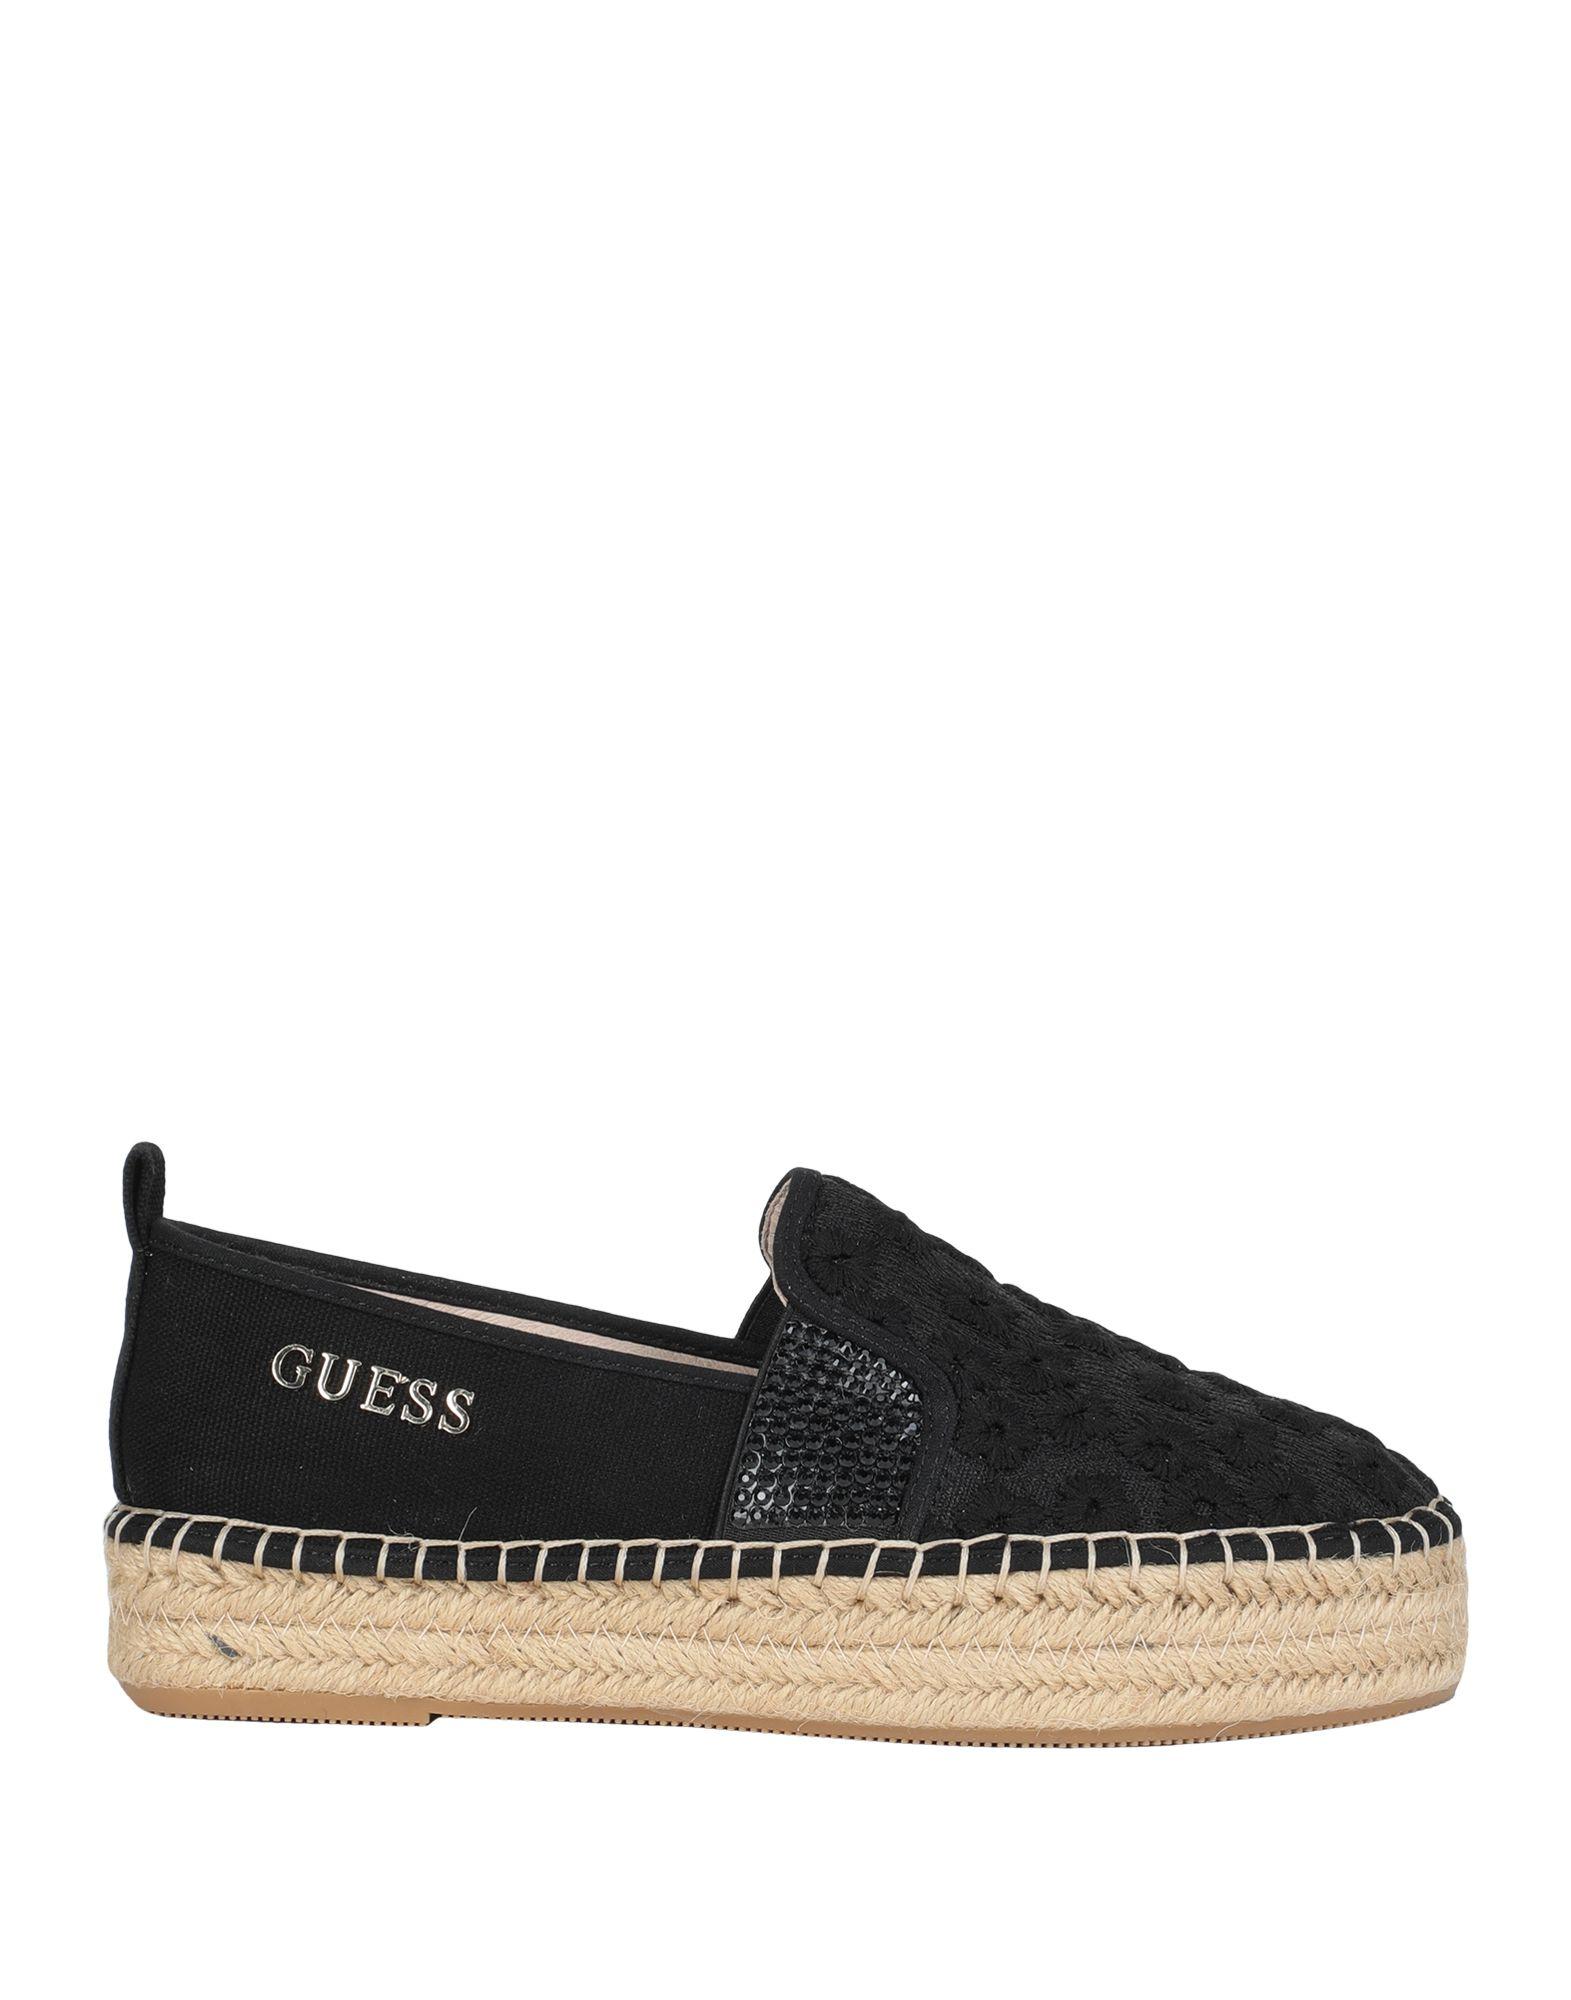 Guess Canvas Espadrilles in Black - Lyst